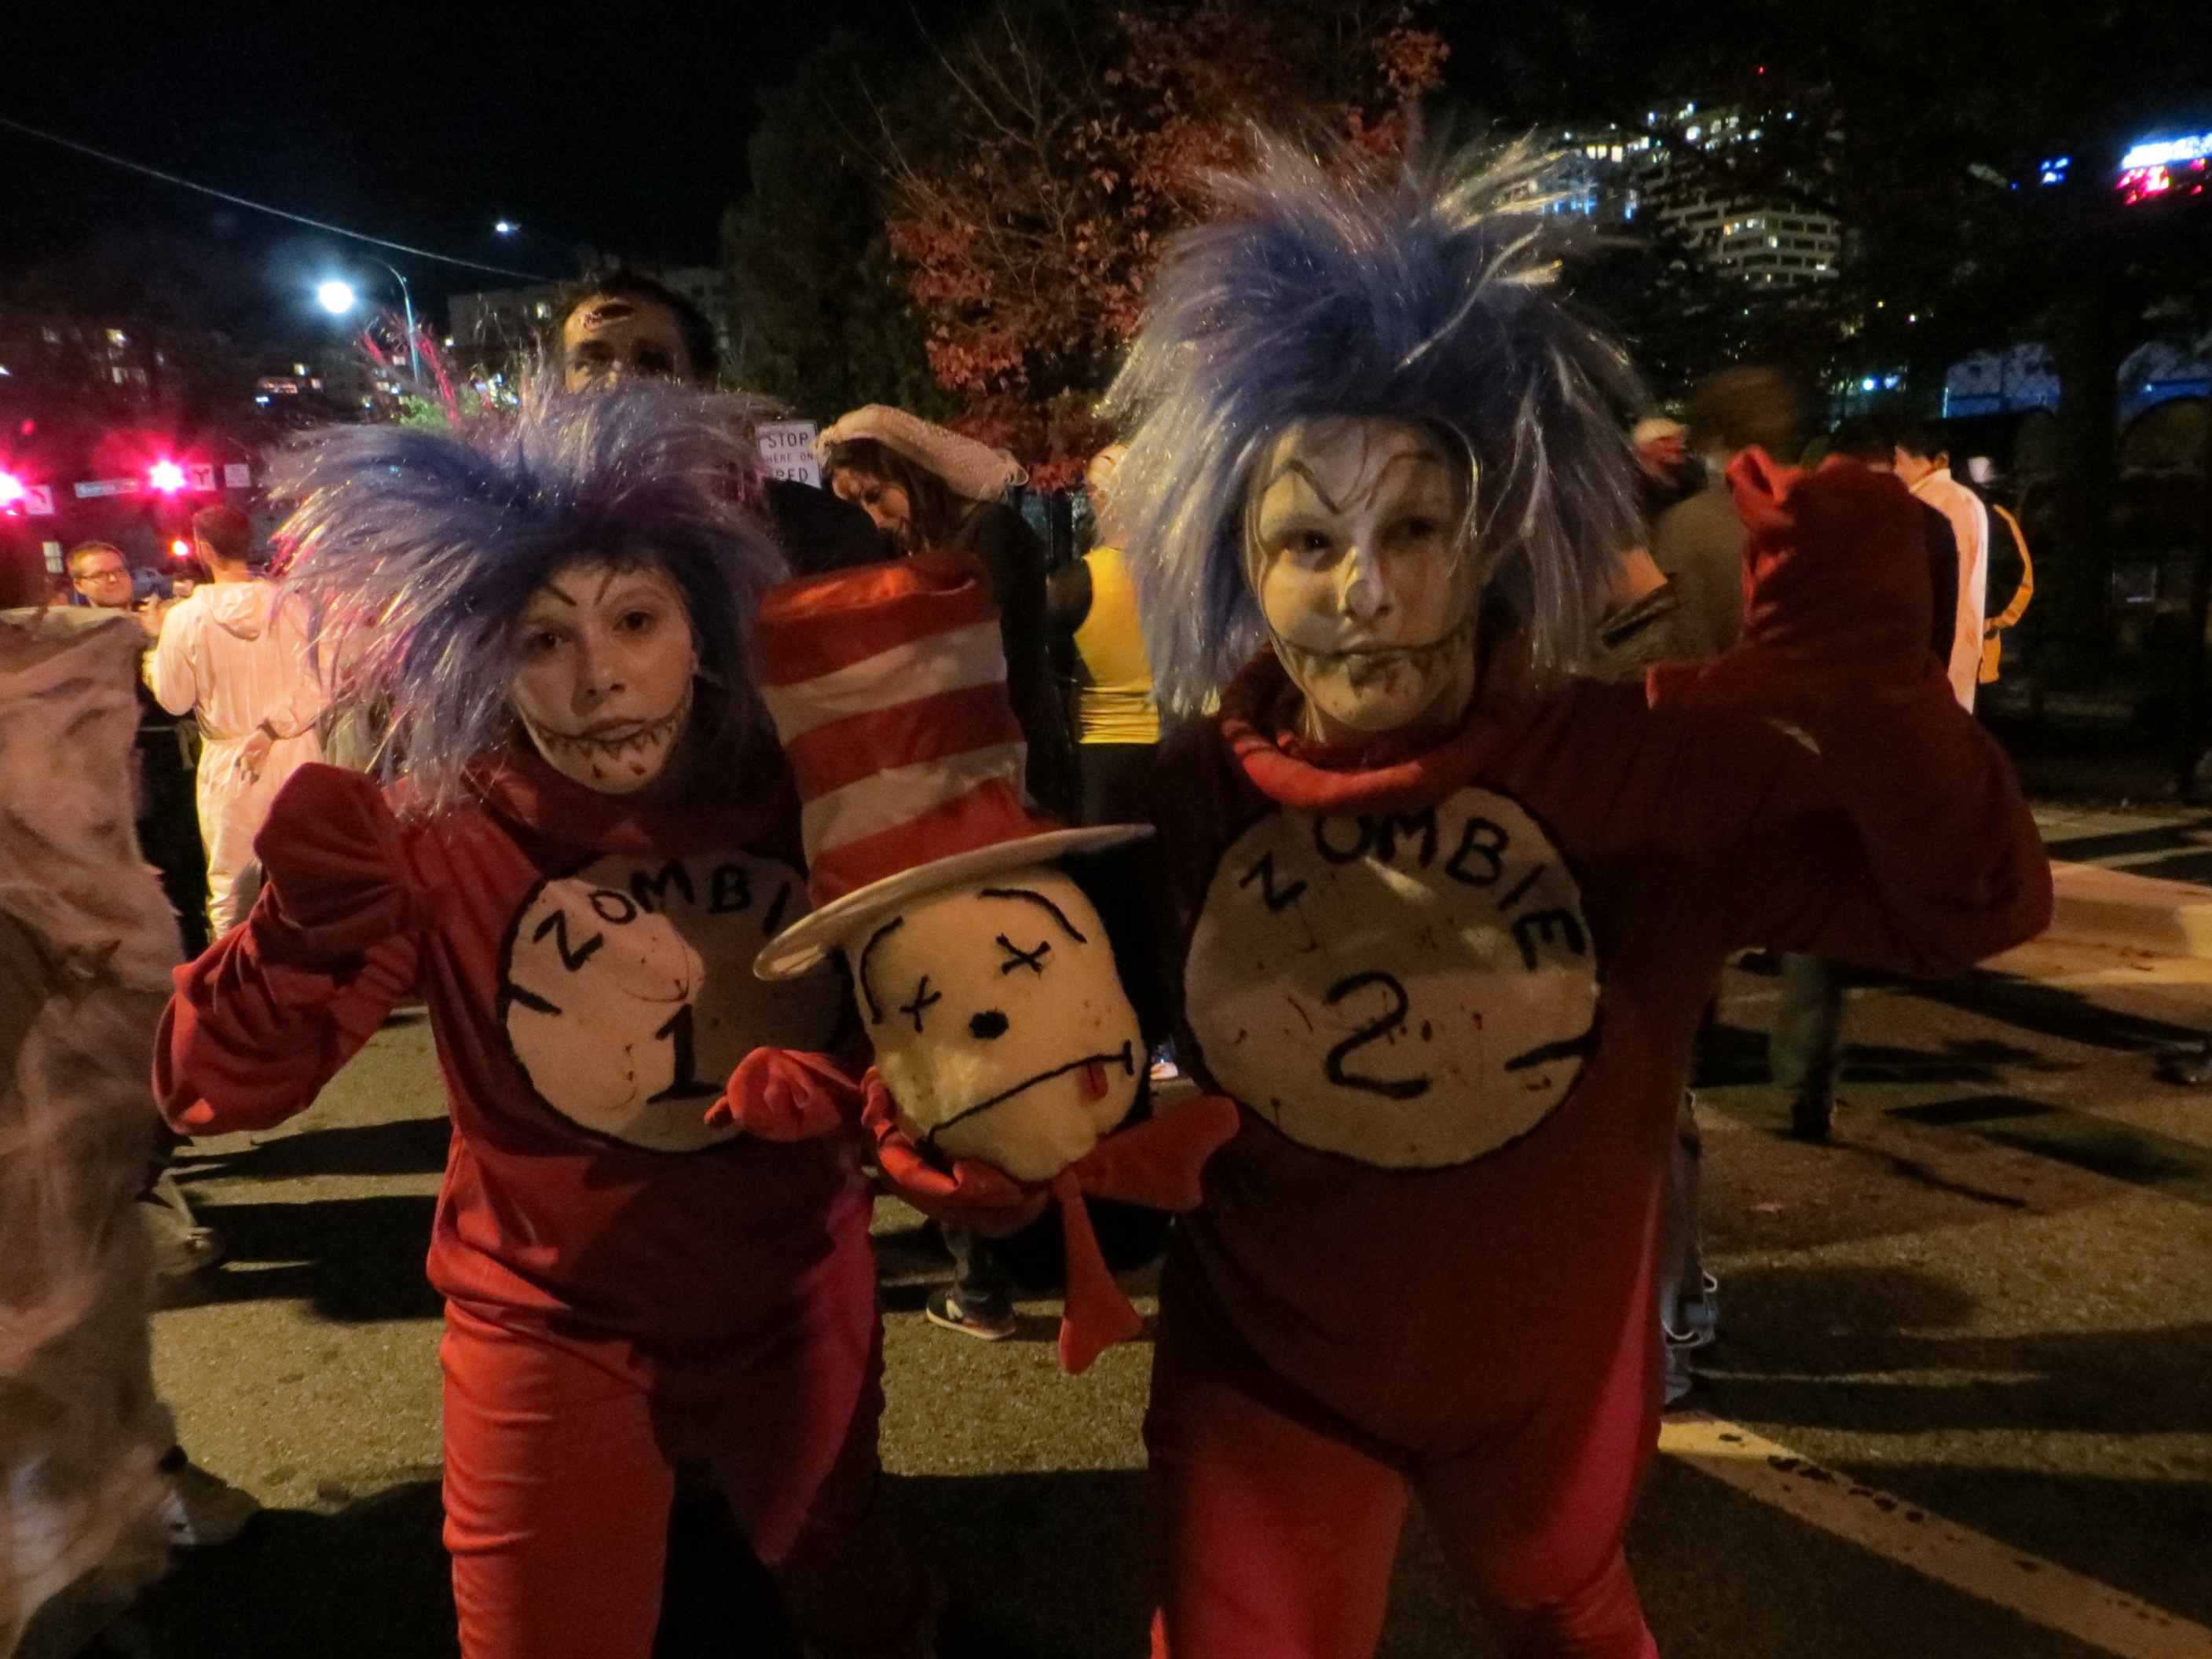 People dressed up as zombie versions of Thing 1 and Thing 2 at the Silver Spring Zombie Walk